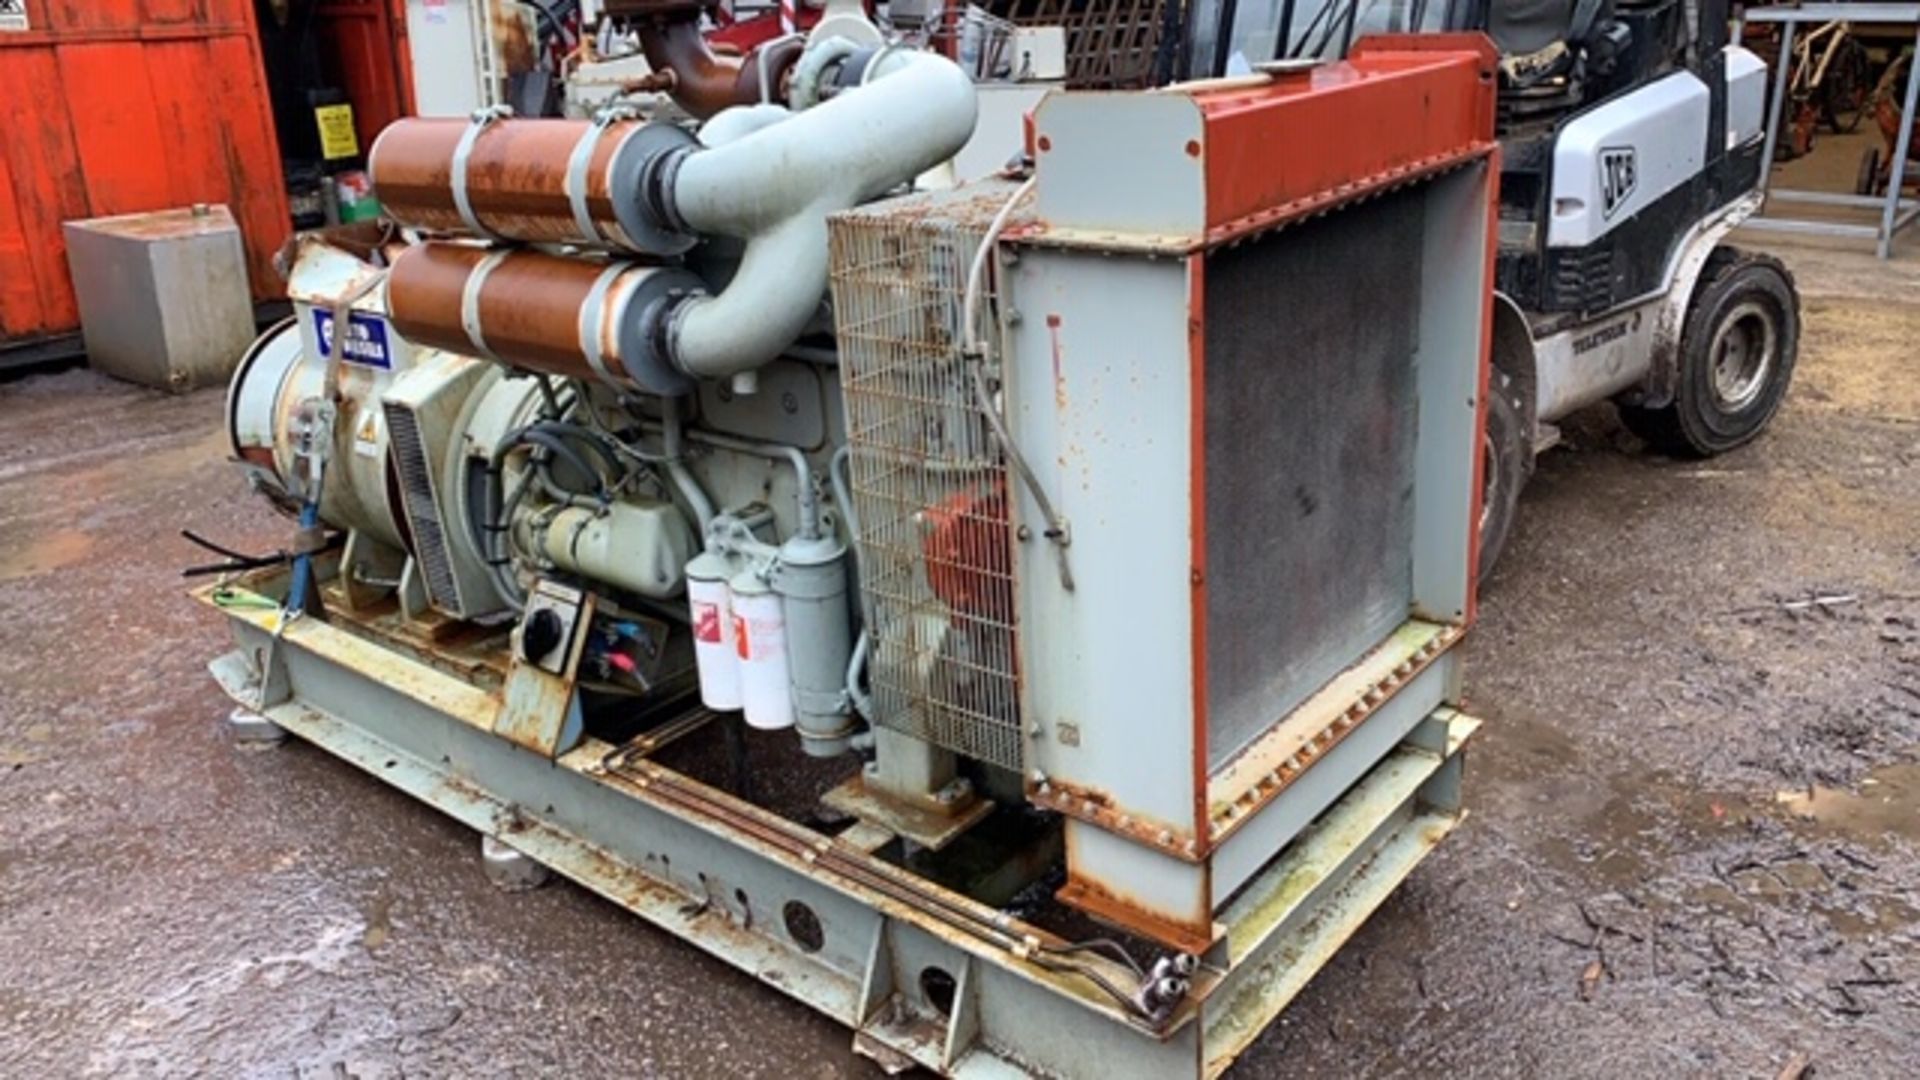 VOLVO ENGINED AUTO DIESELS 200KVA GENERATOR SET. EX AIRPORT STANDBY USE. REMOVED IN RUNNING - Image 4 of 4